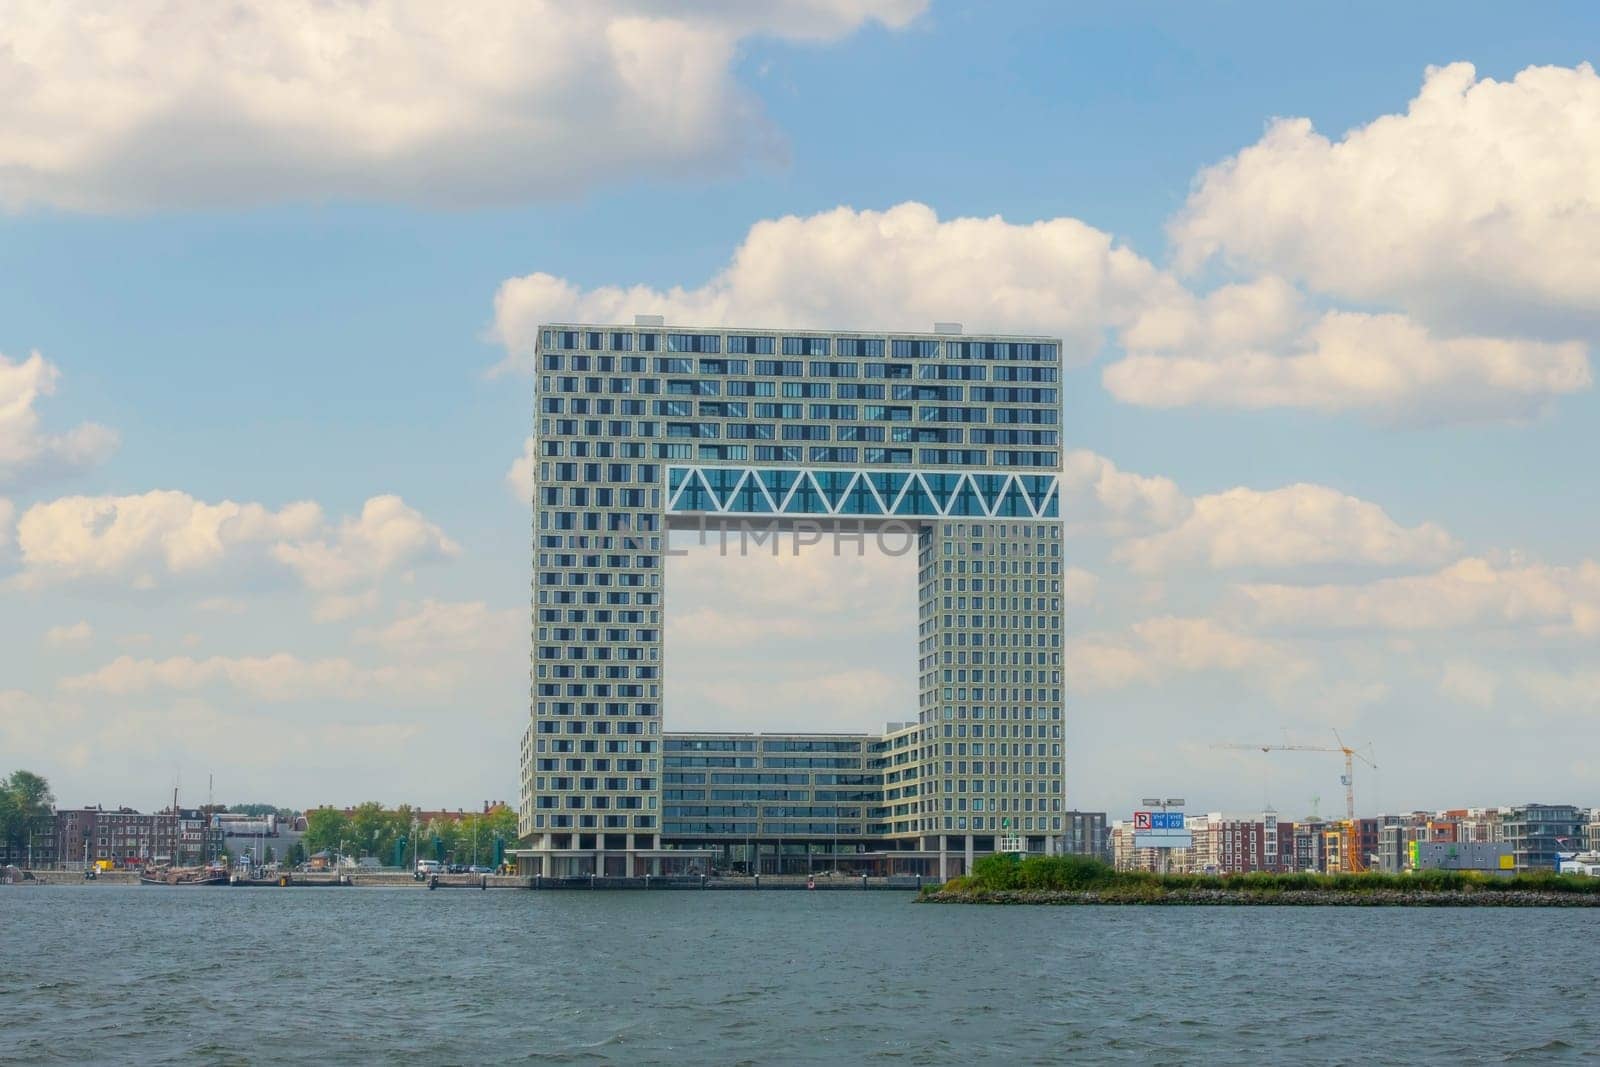 Modern Office Building in Amsterdam by Ruckzack